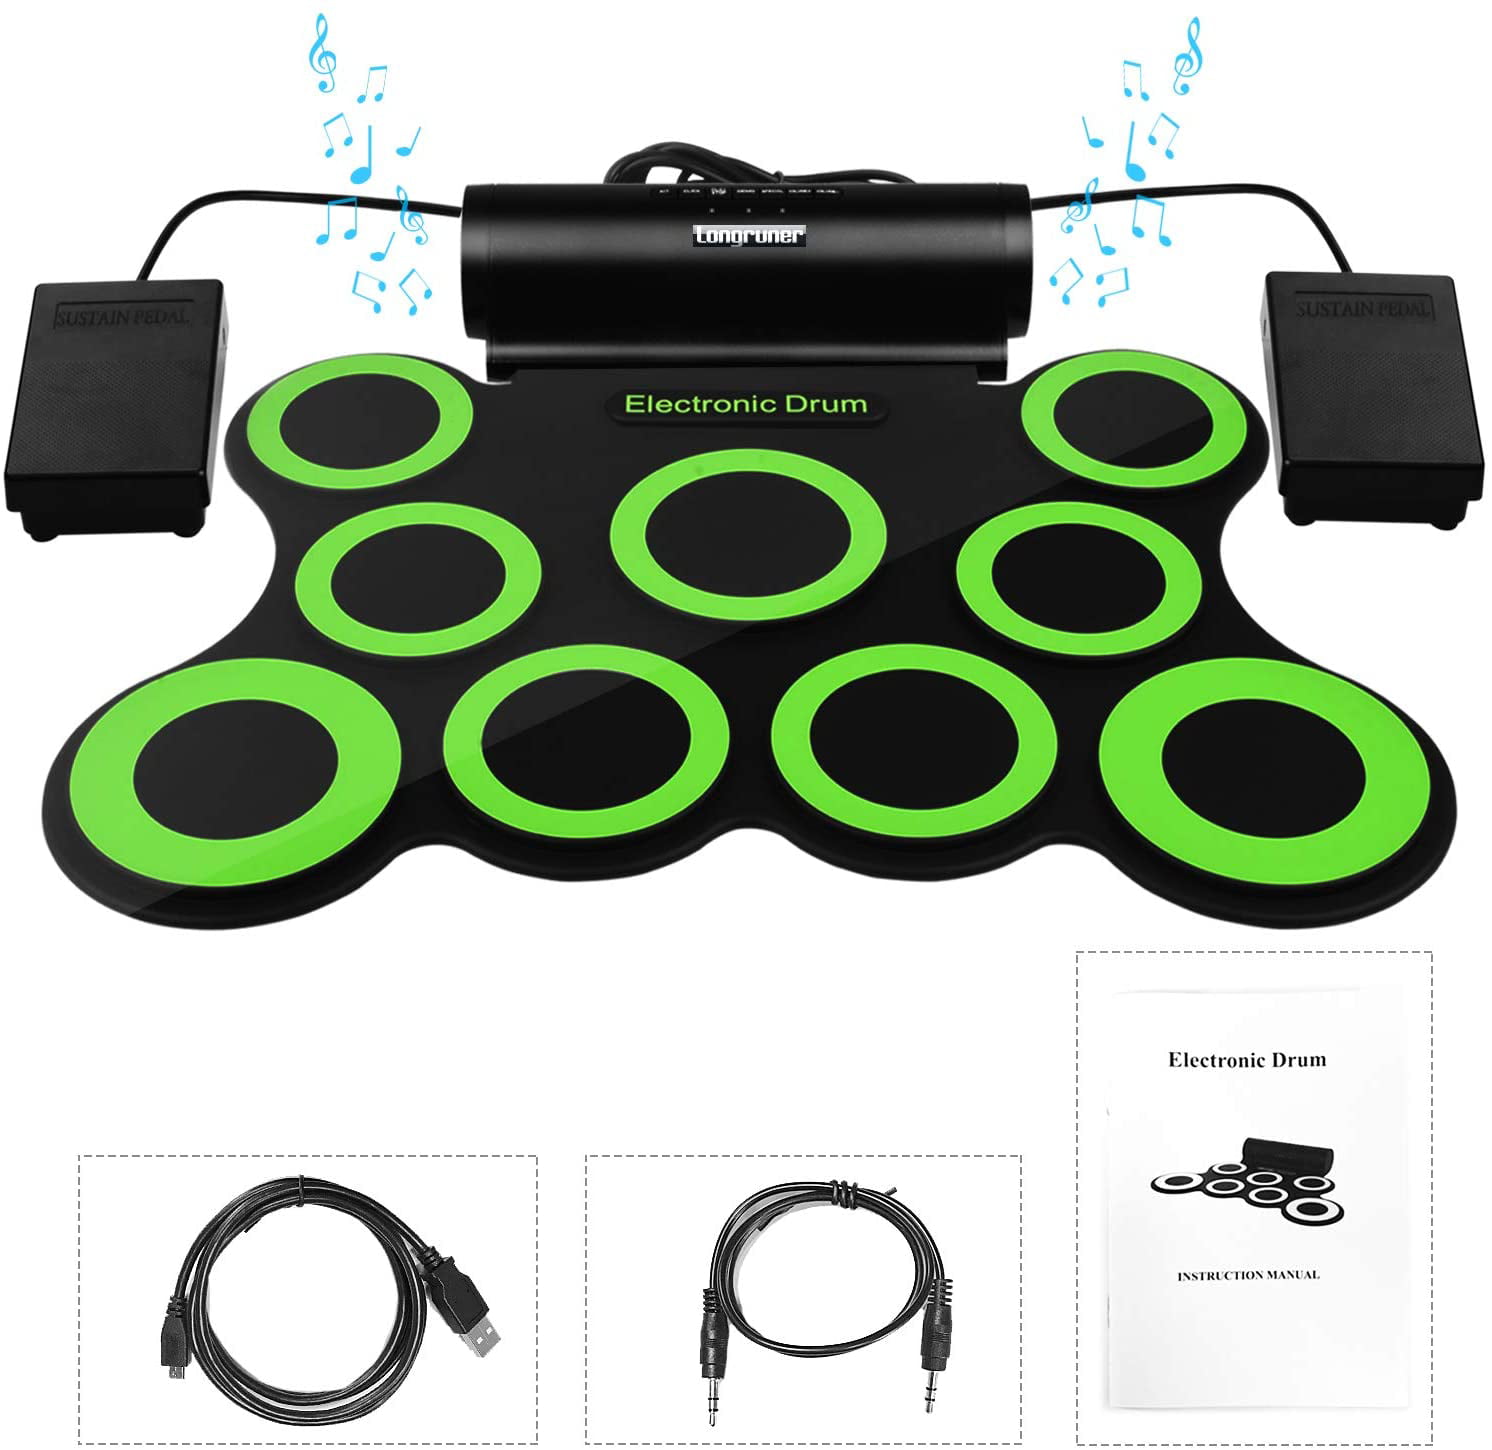 Longruner Foldable Roll Up Drum Kit with 7 Drum Practise Pads 2 Foot Drum Pedals 3 Drum Sticks Electronic Drum Set Headphone Jack Best Birthday Christmas Gift for Kids Children Starters 